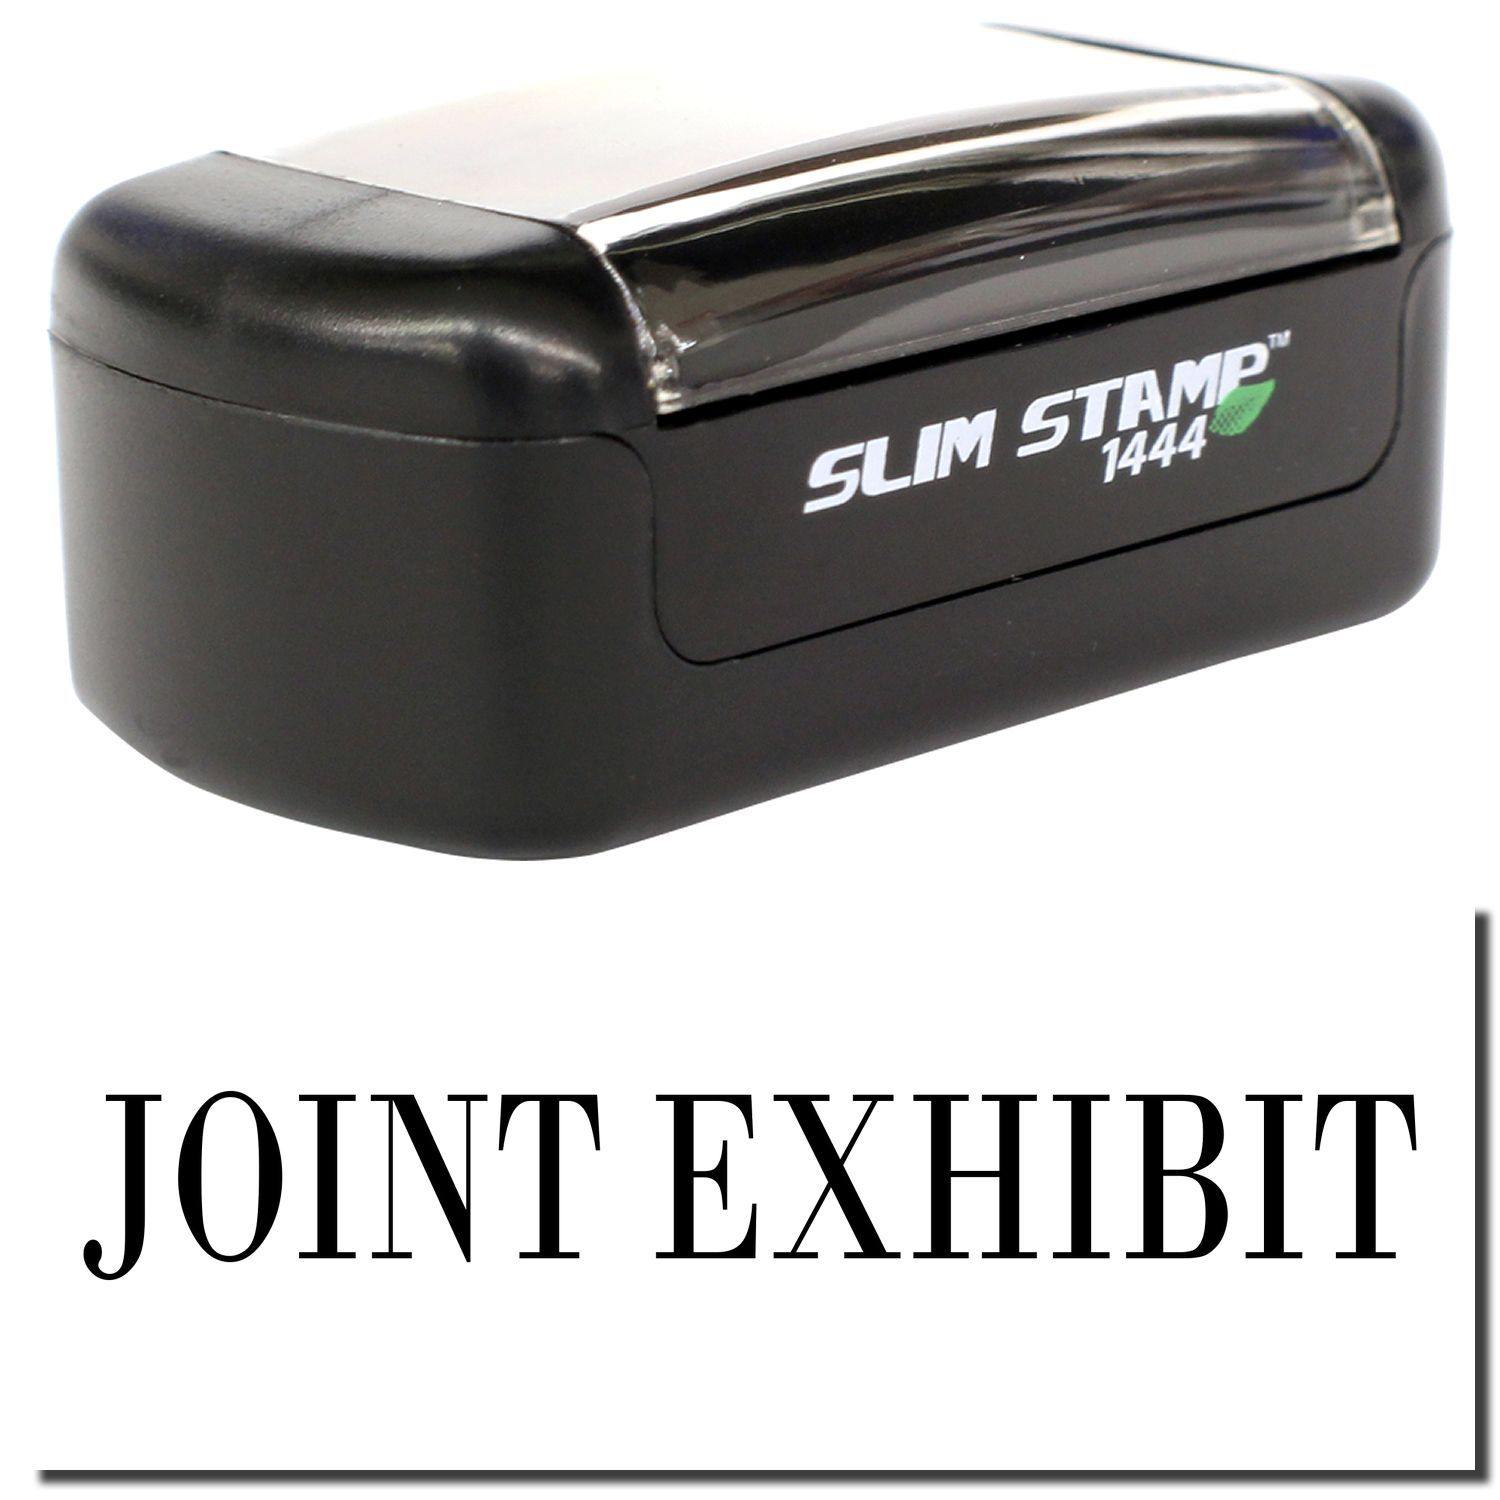 A stock office pre-inked stamp with a stamped image showing how the text "JOINT EXHIBIT" is displayed after stamping.